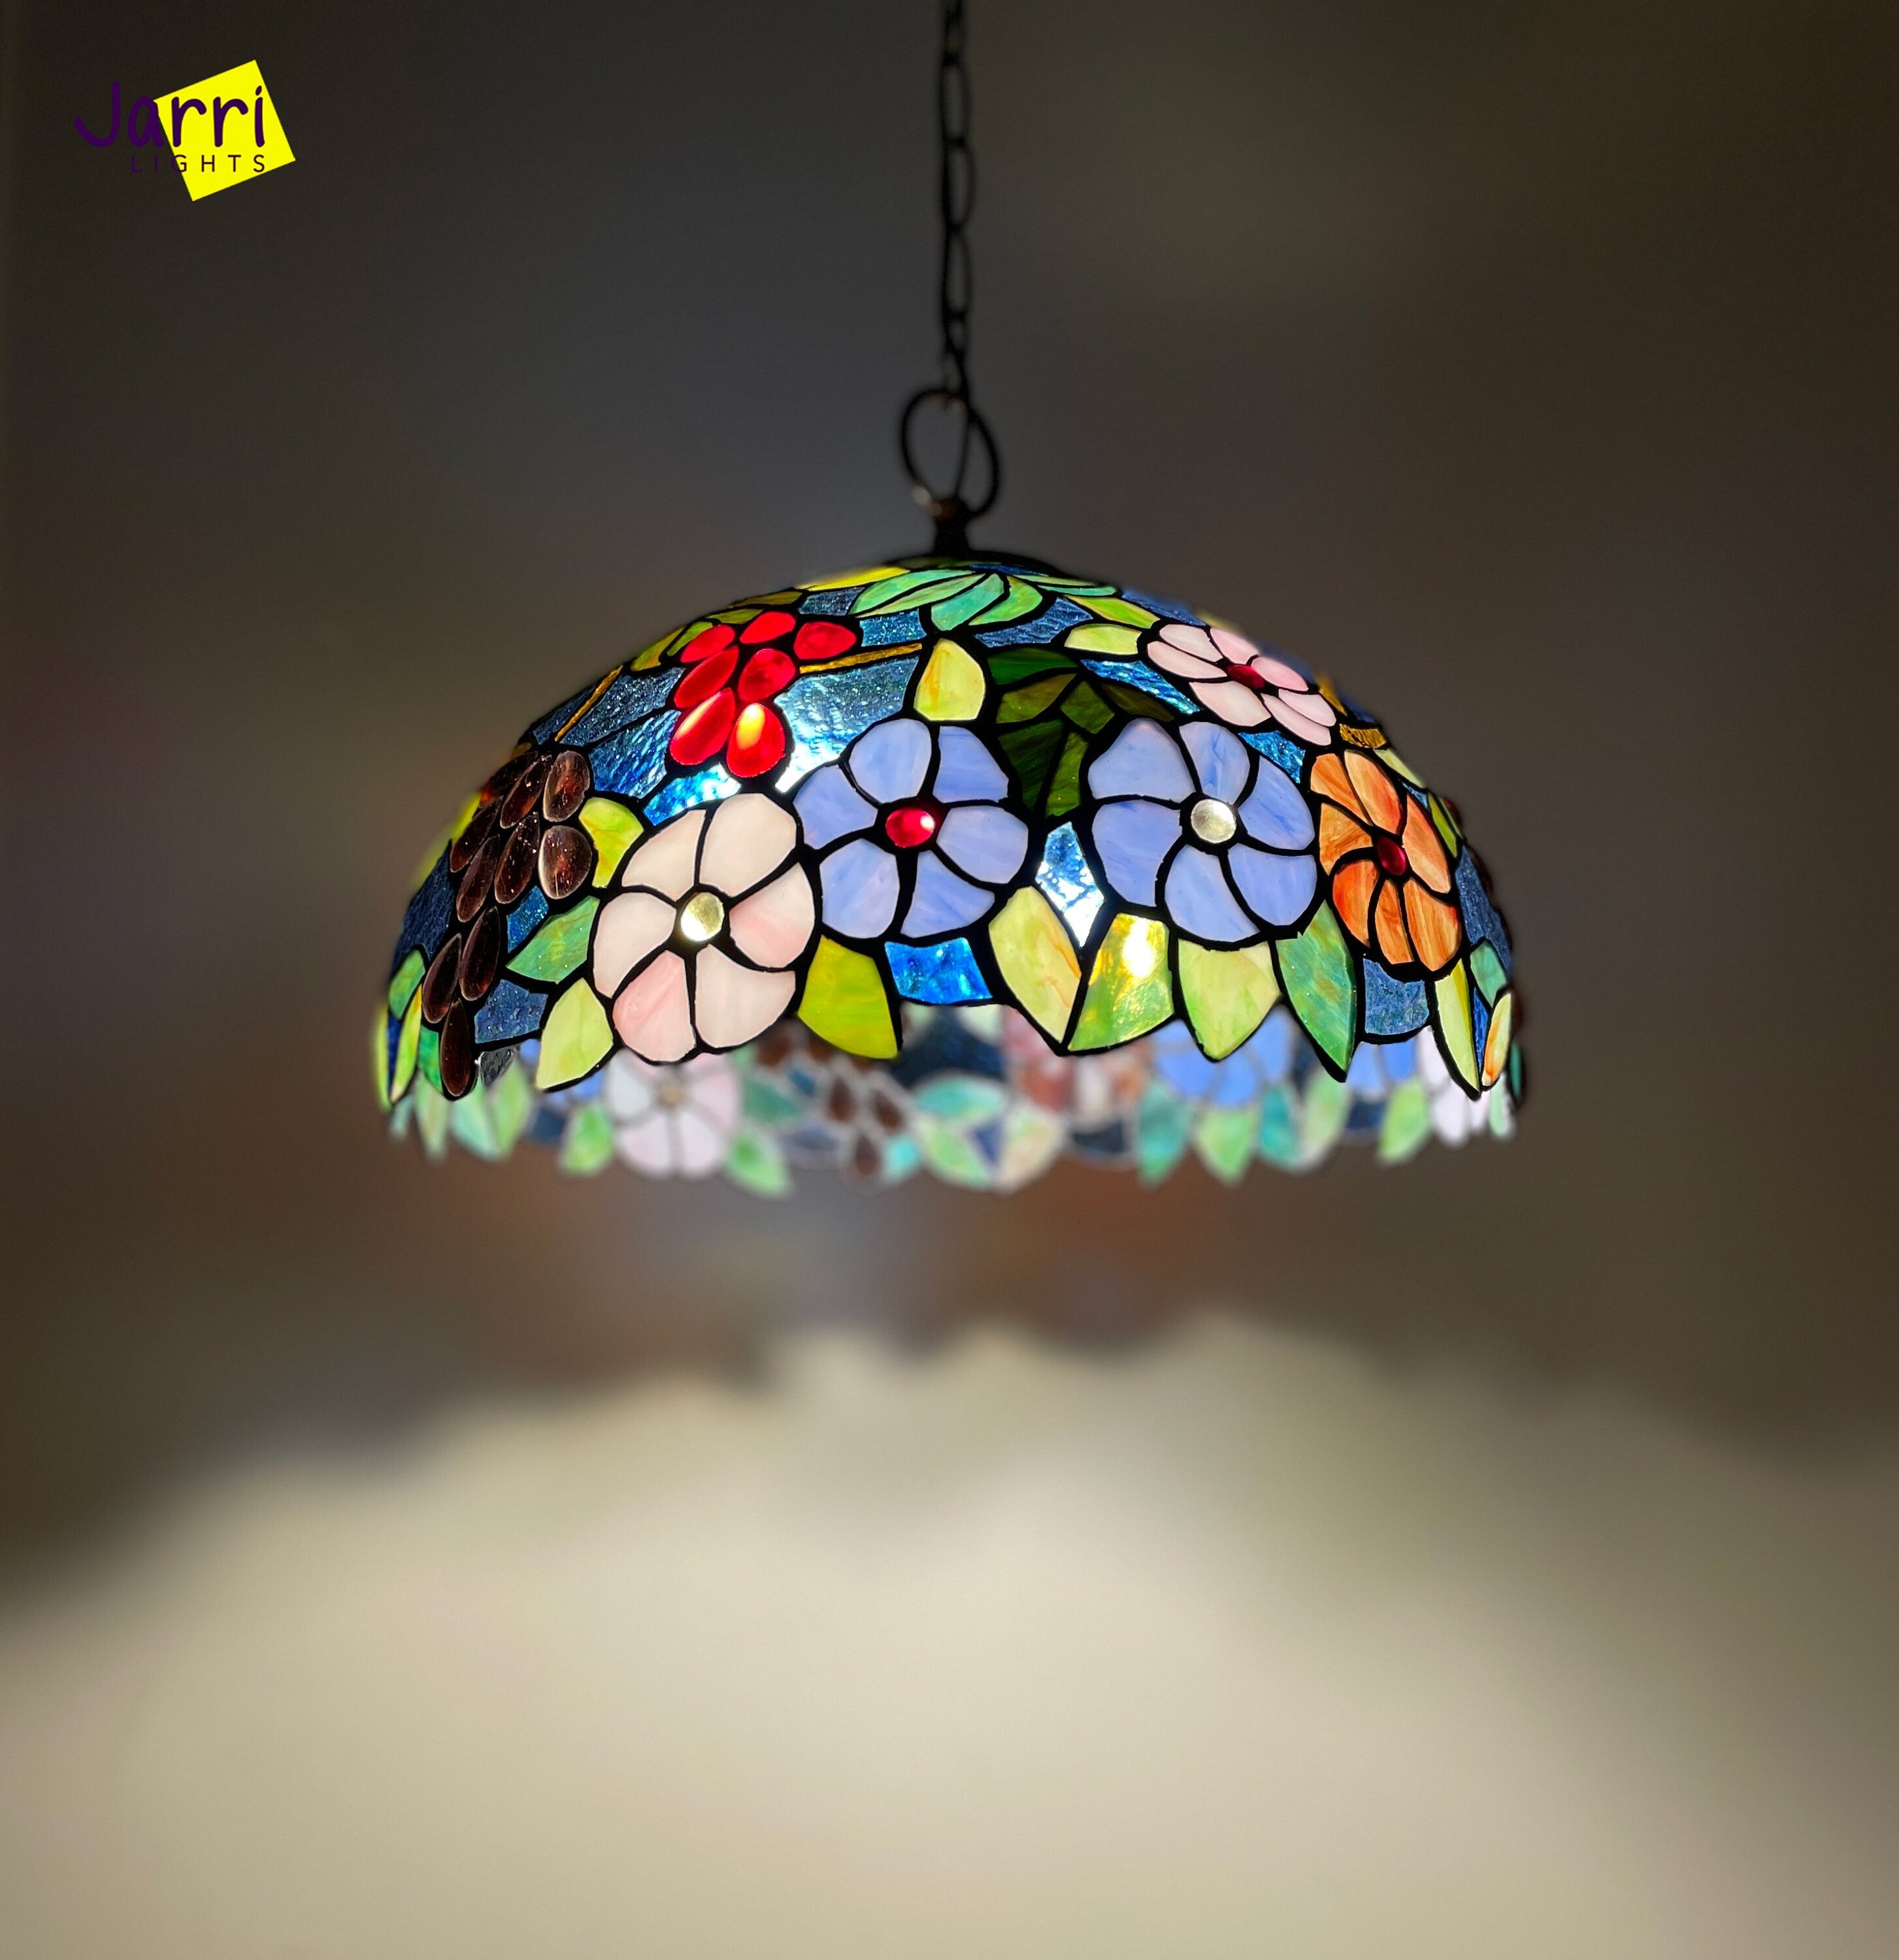 Tiffany Hanging Lamp 16in, Roses with Grapes Leadglass Stained Glass Crystal Bead Lampshade, Chandelier, Pendant Light, Dining Kitchen Lamp